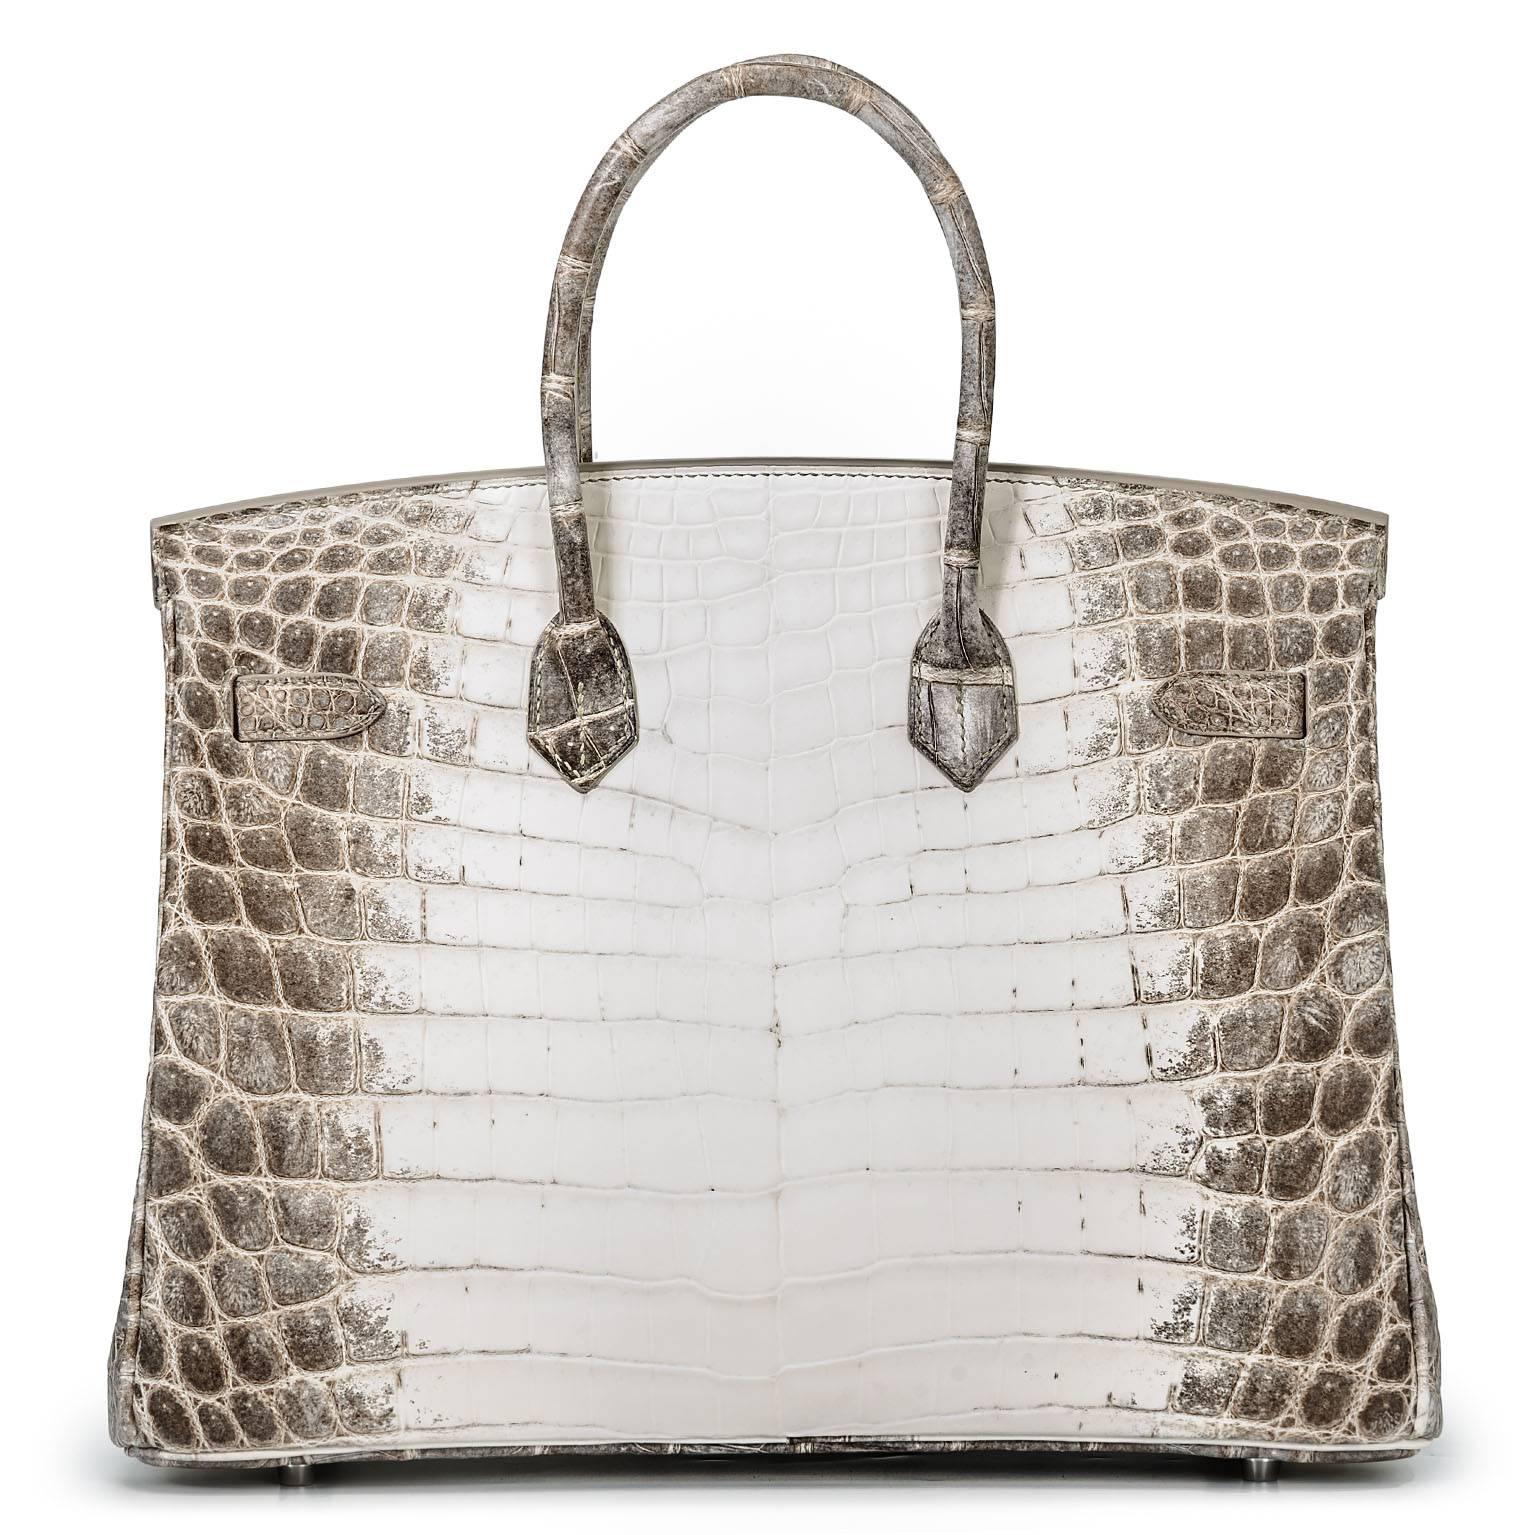 This 35 cm Himalayan Birkin crafted from the skin of an almost-albino pale crocodile to give it a white Himalaya color. The  Himalayan Birkin is the rarest and most desirable handbag in the world!!!

It is sold only to Hermès VIP clients with a